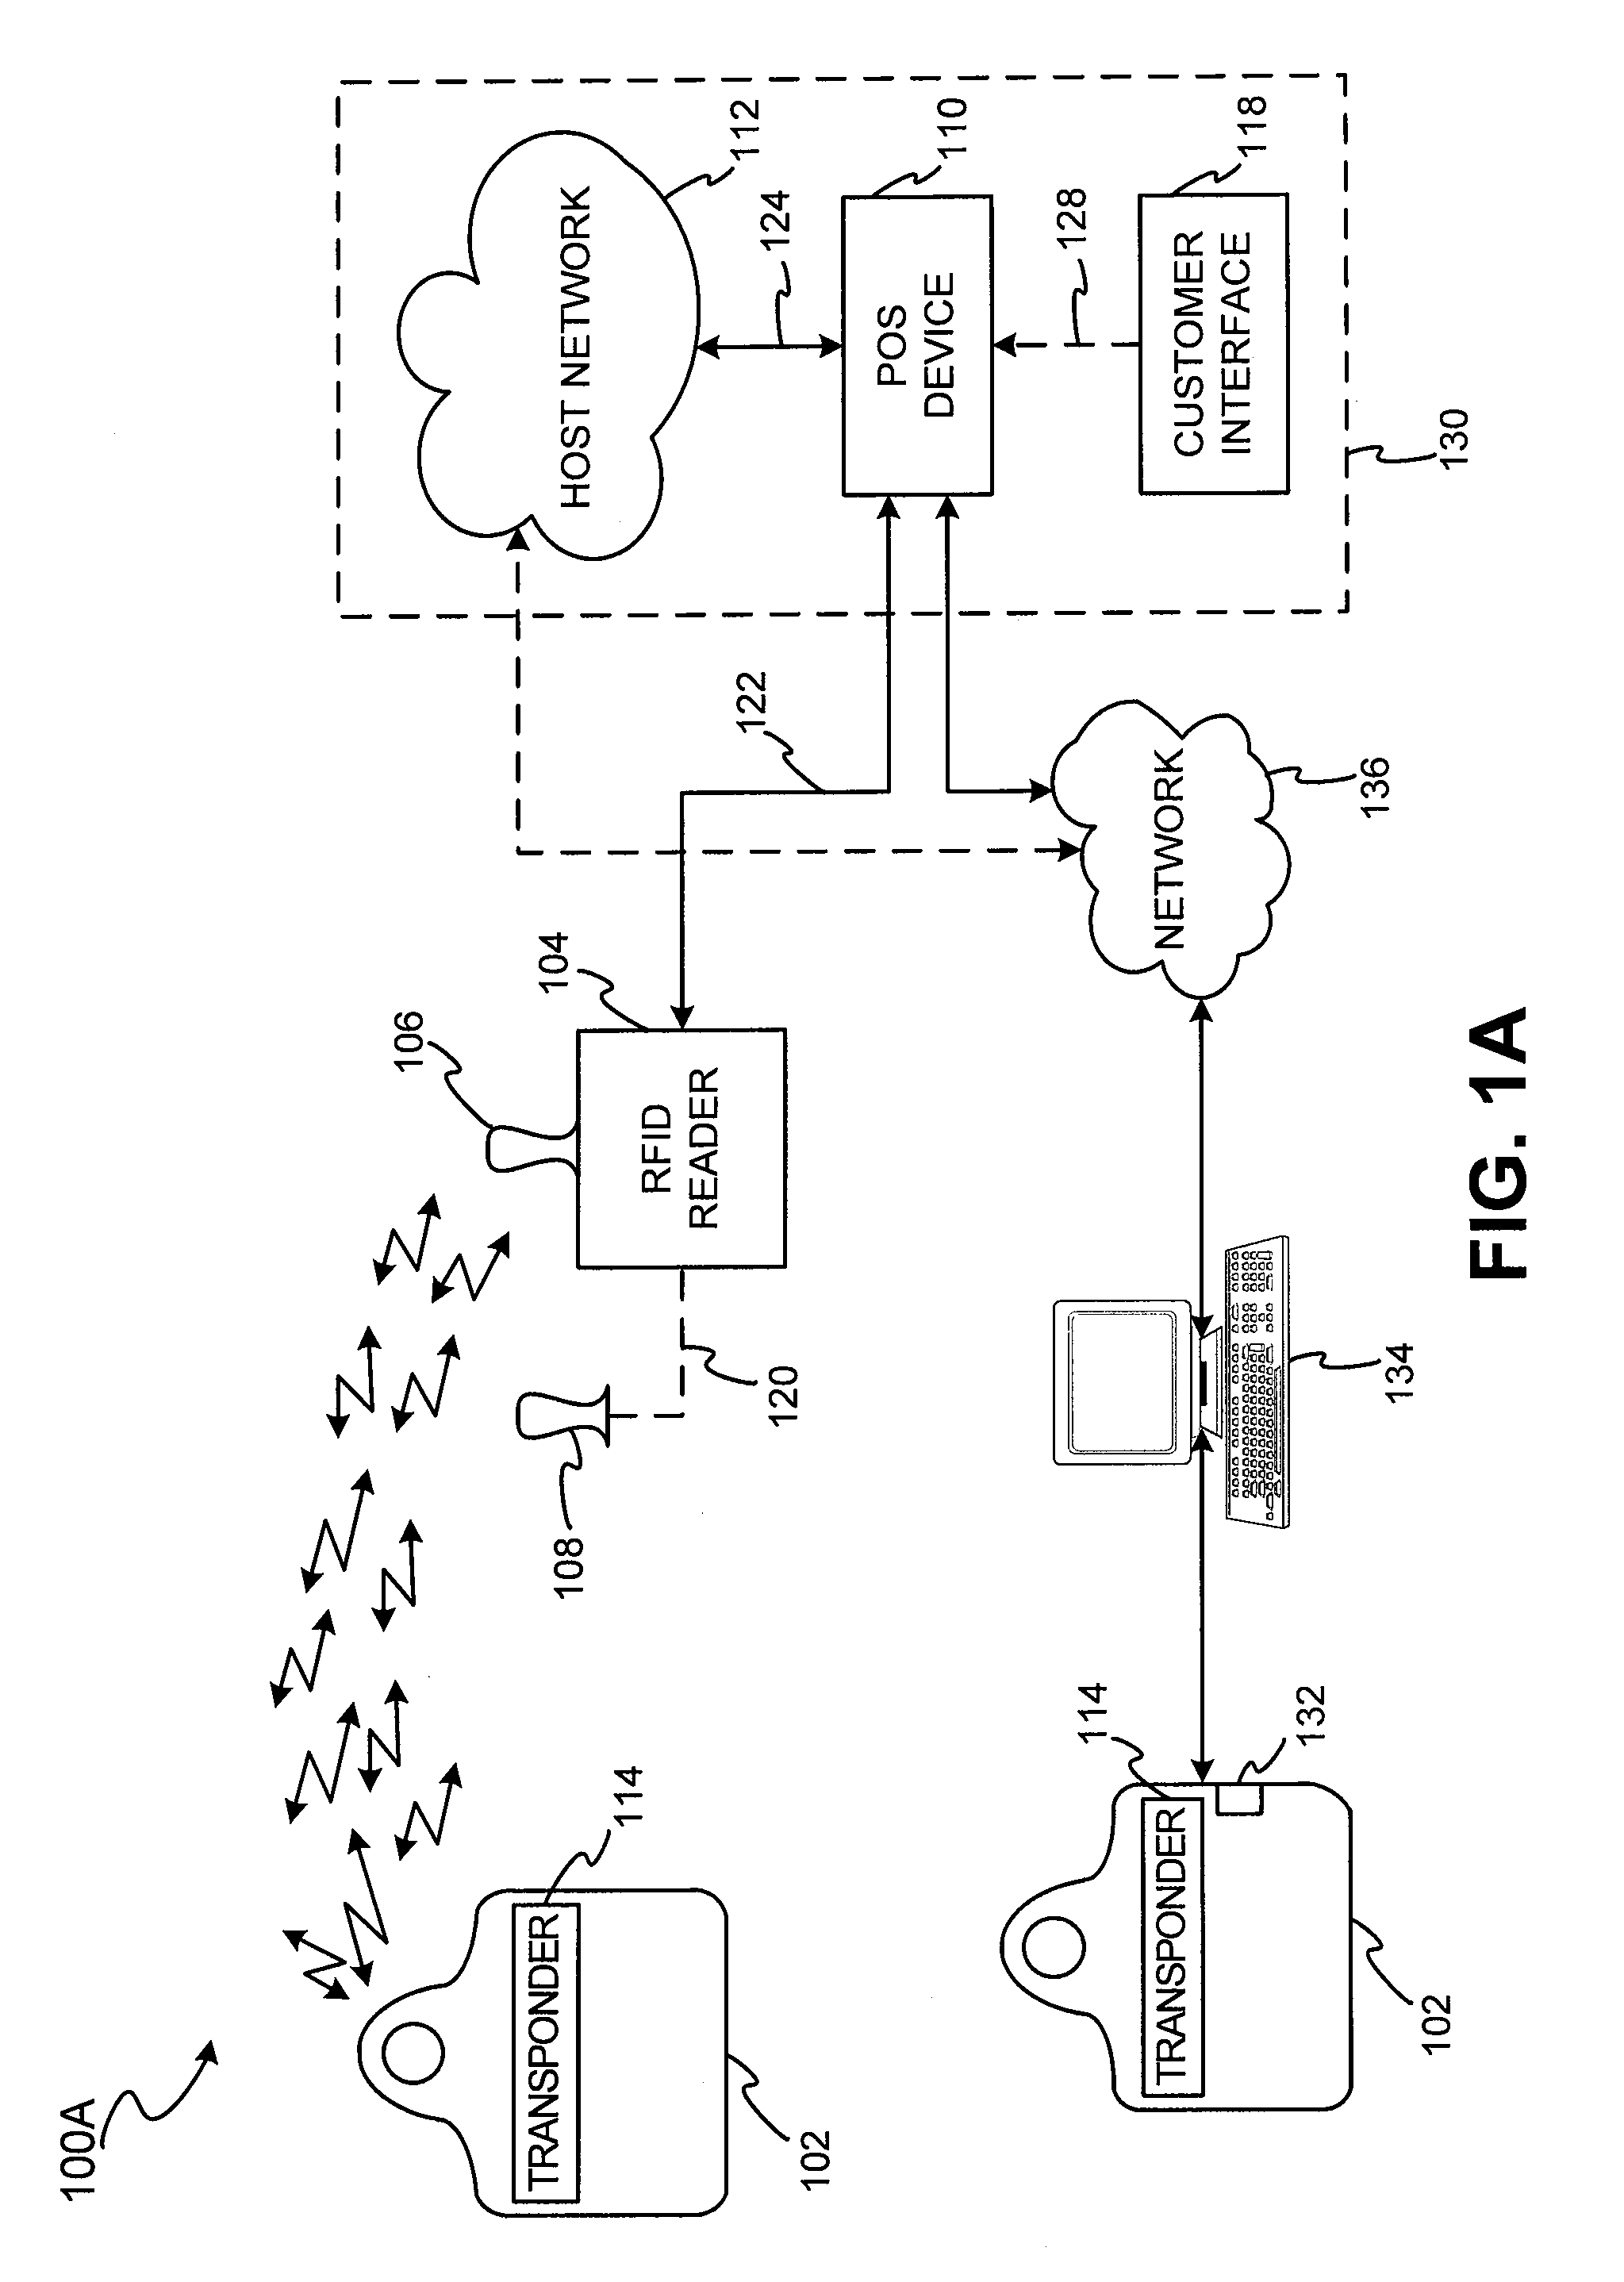 RF transactions using a wireless reader grid